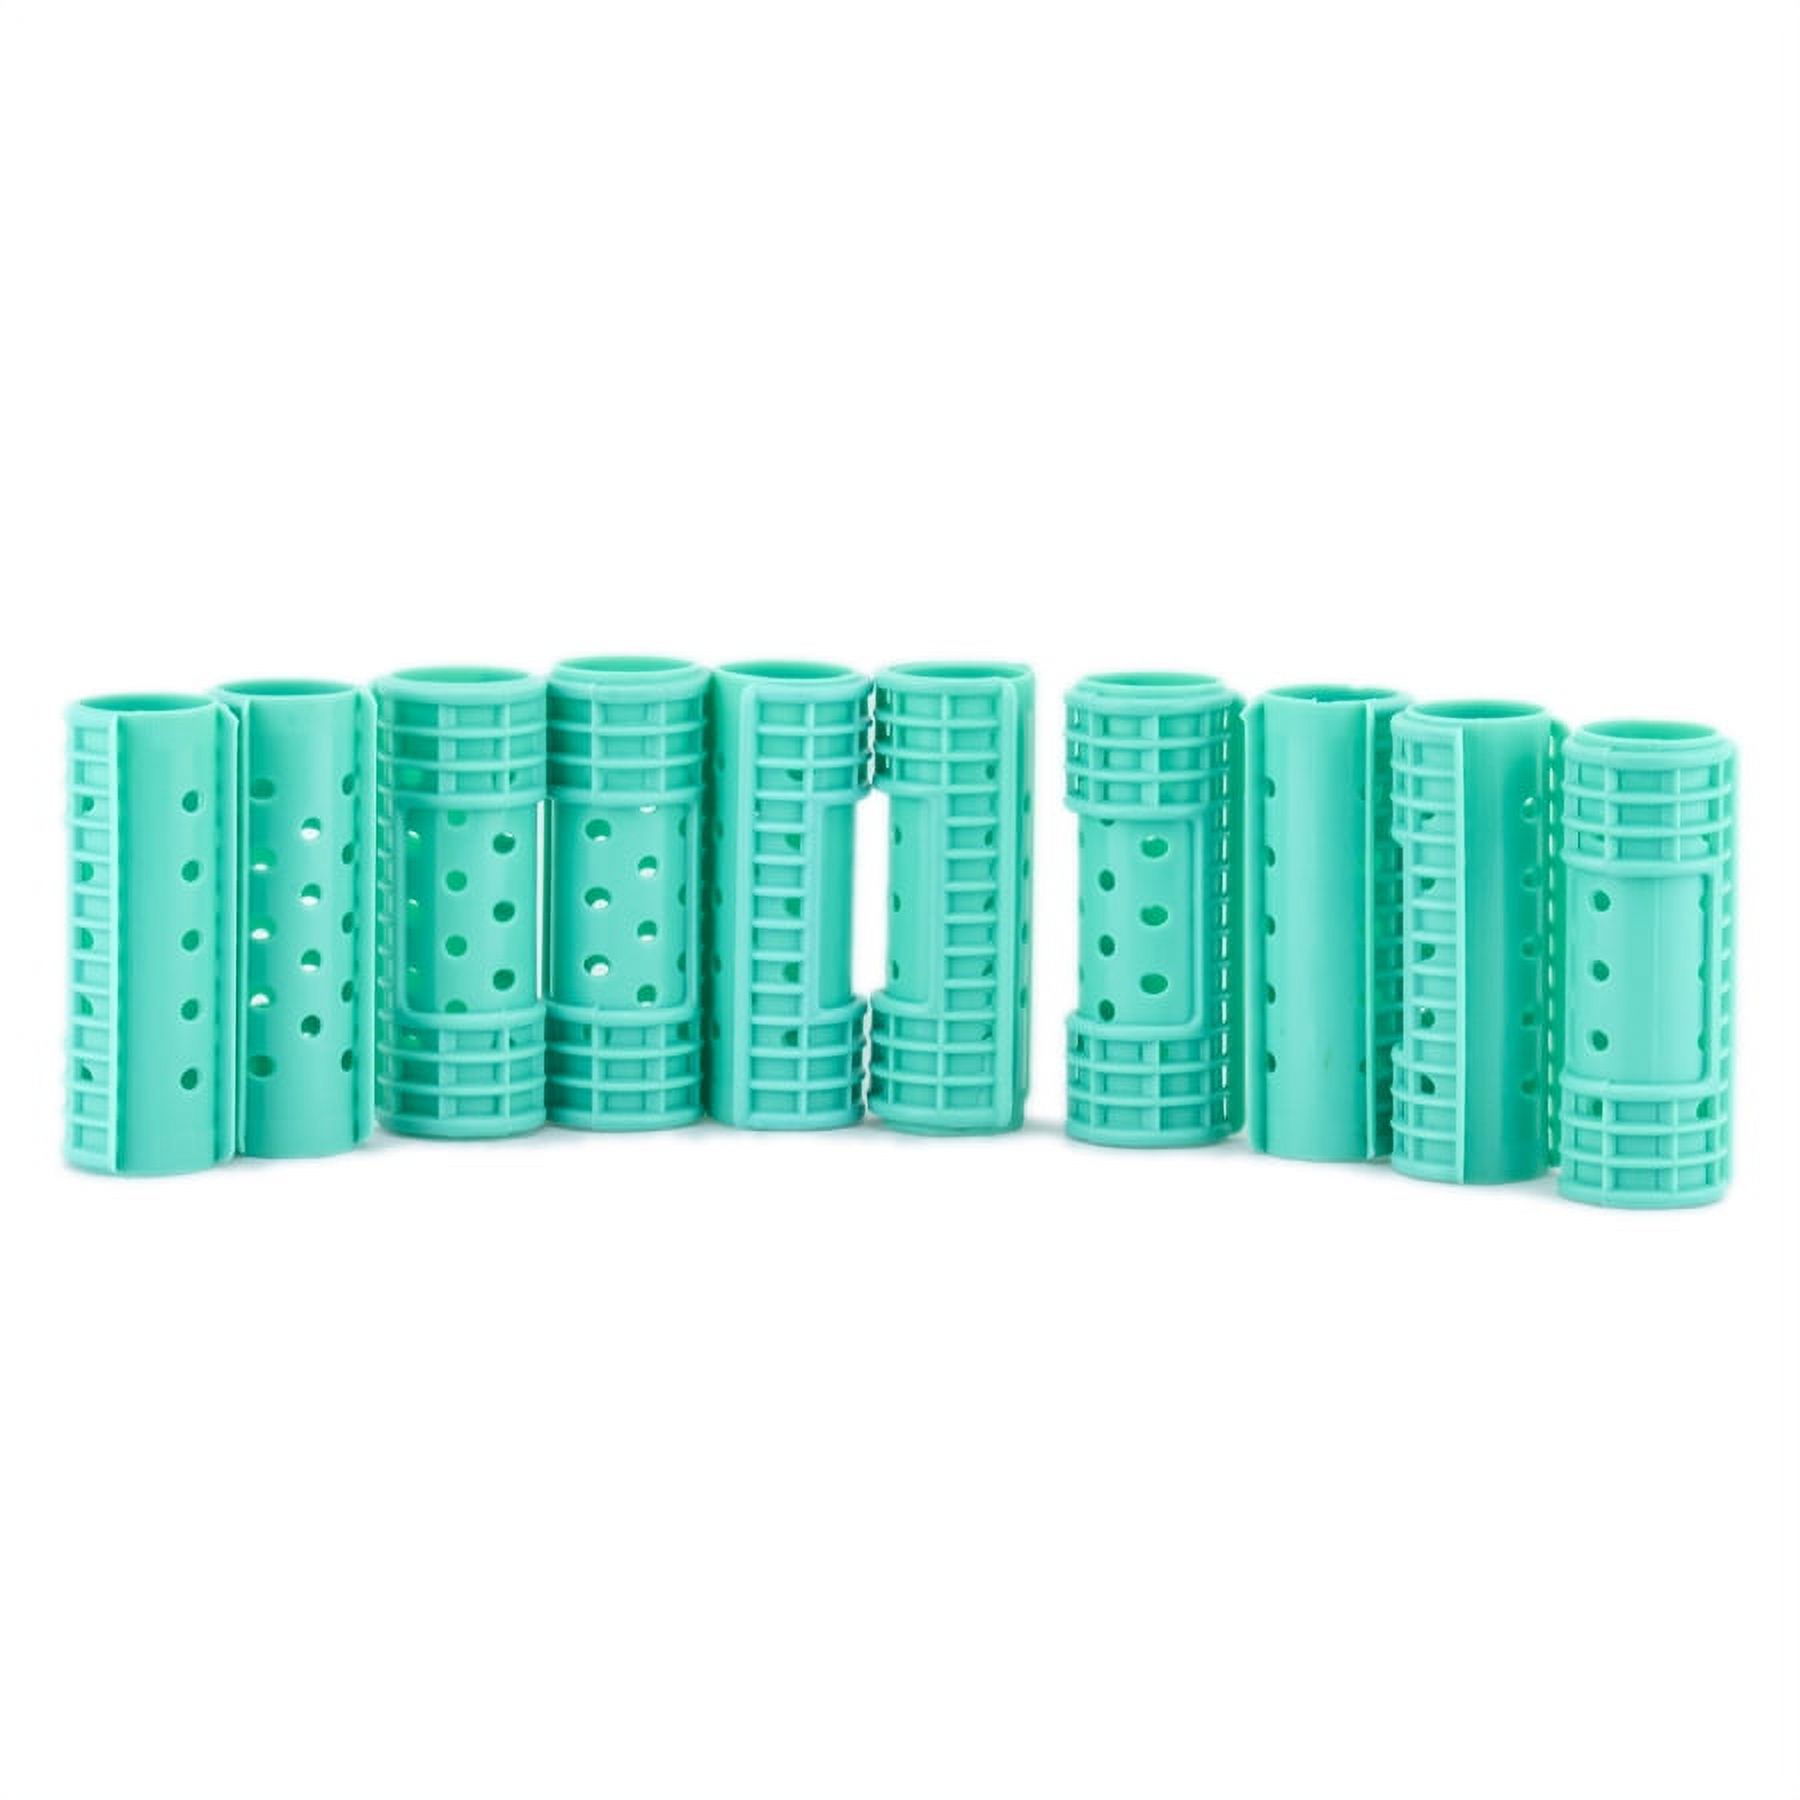 Diane Snap-On Magnetic Rollers ( 7/8" Green - 10 Pack #4718) - image 1 of 2